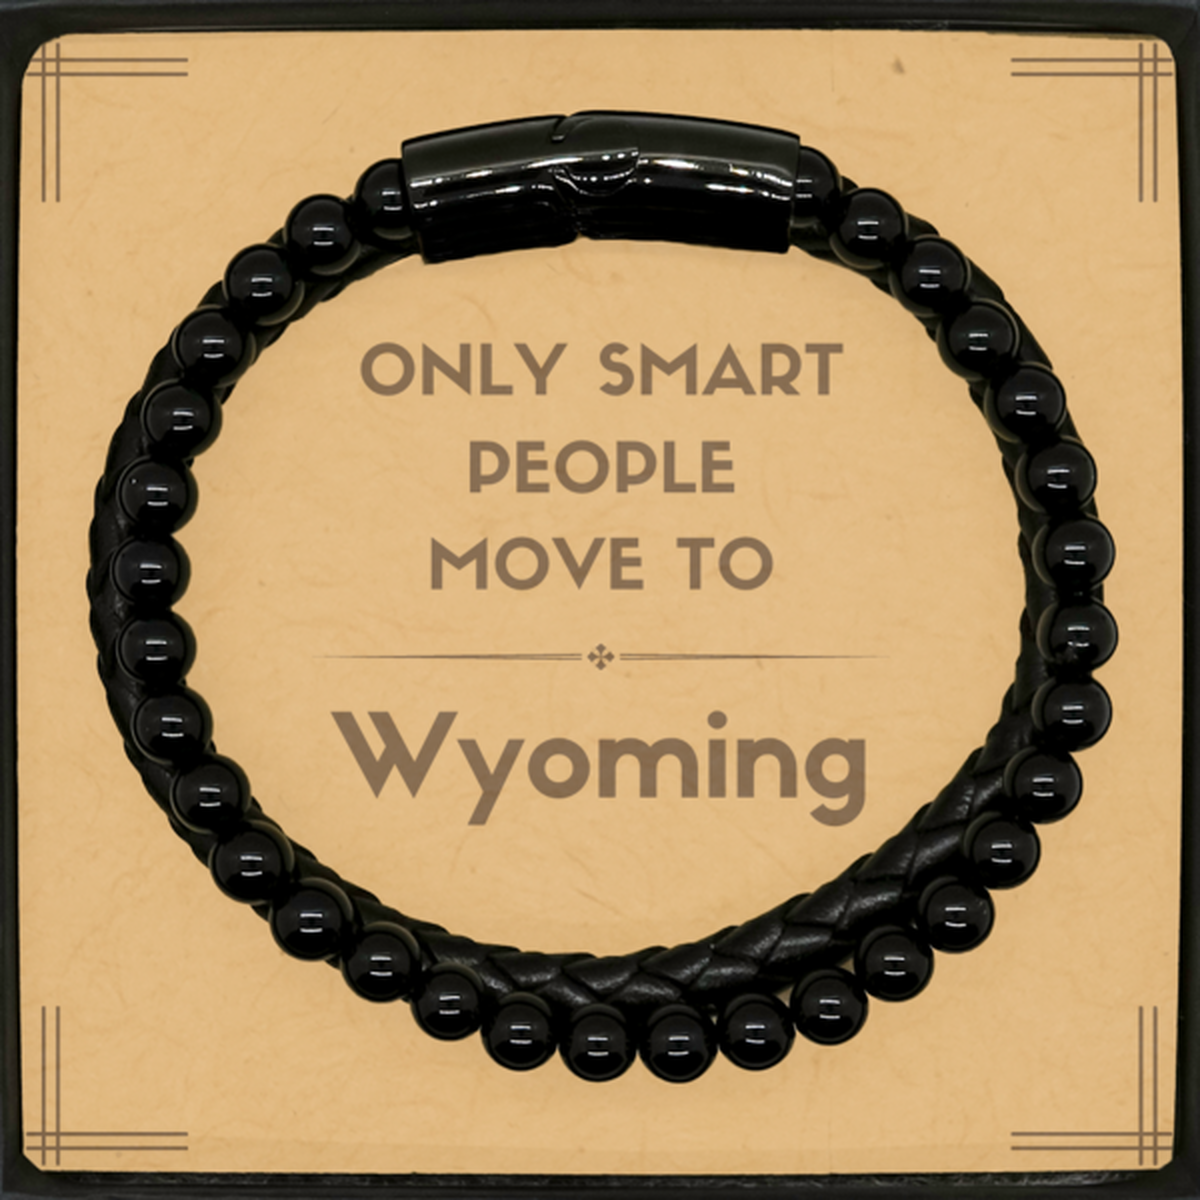 Only smart people move to Wyoming Stone Leather Bracelets, Message Card Gifts For Wyoming, Move to Wyoming Gifts for Friends Coworker Funny Saying Quote